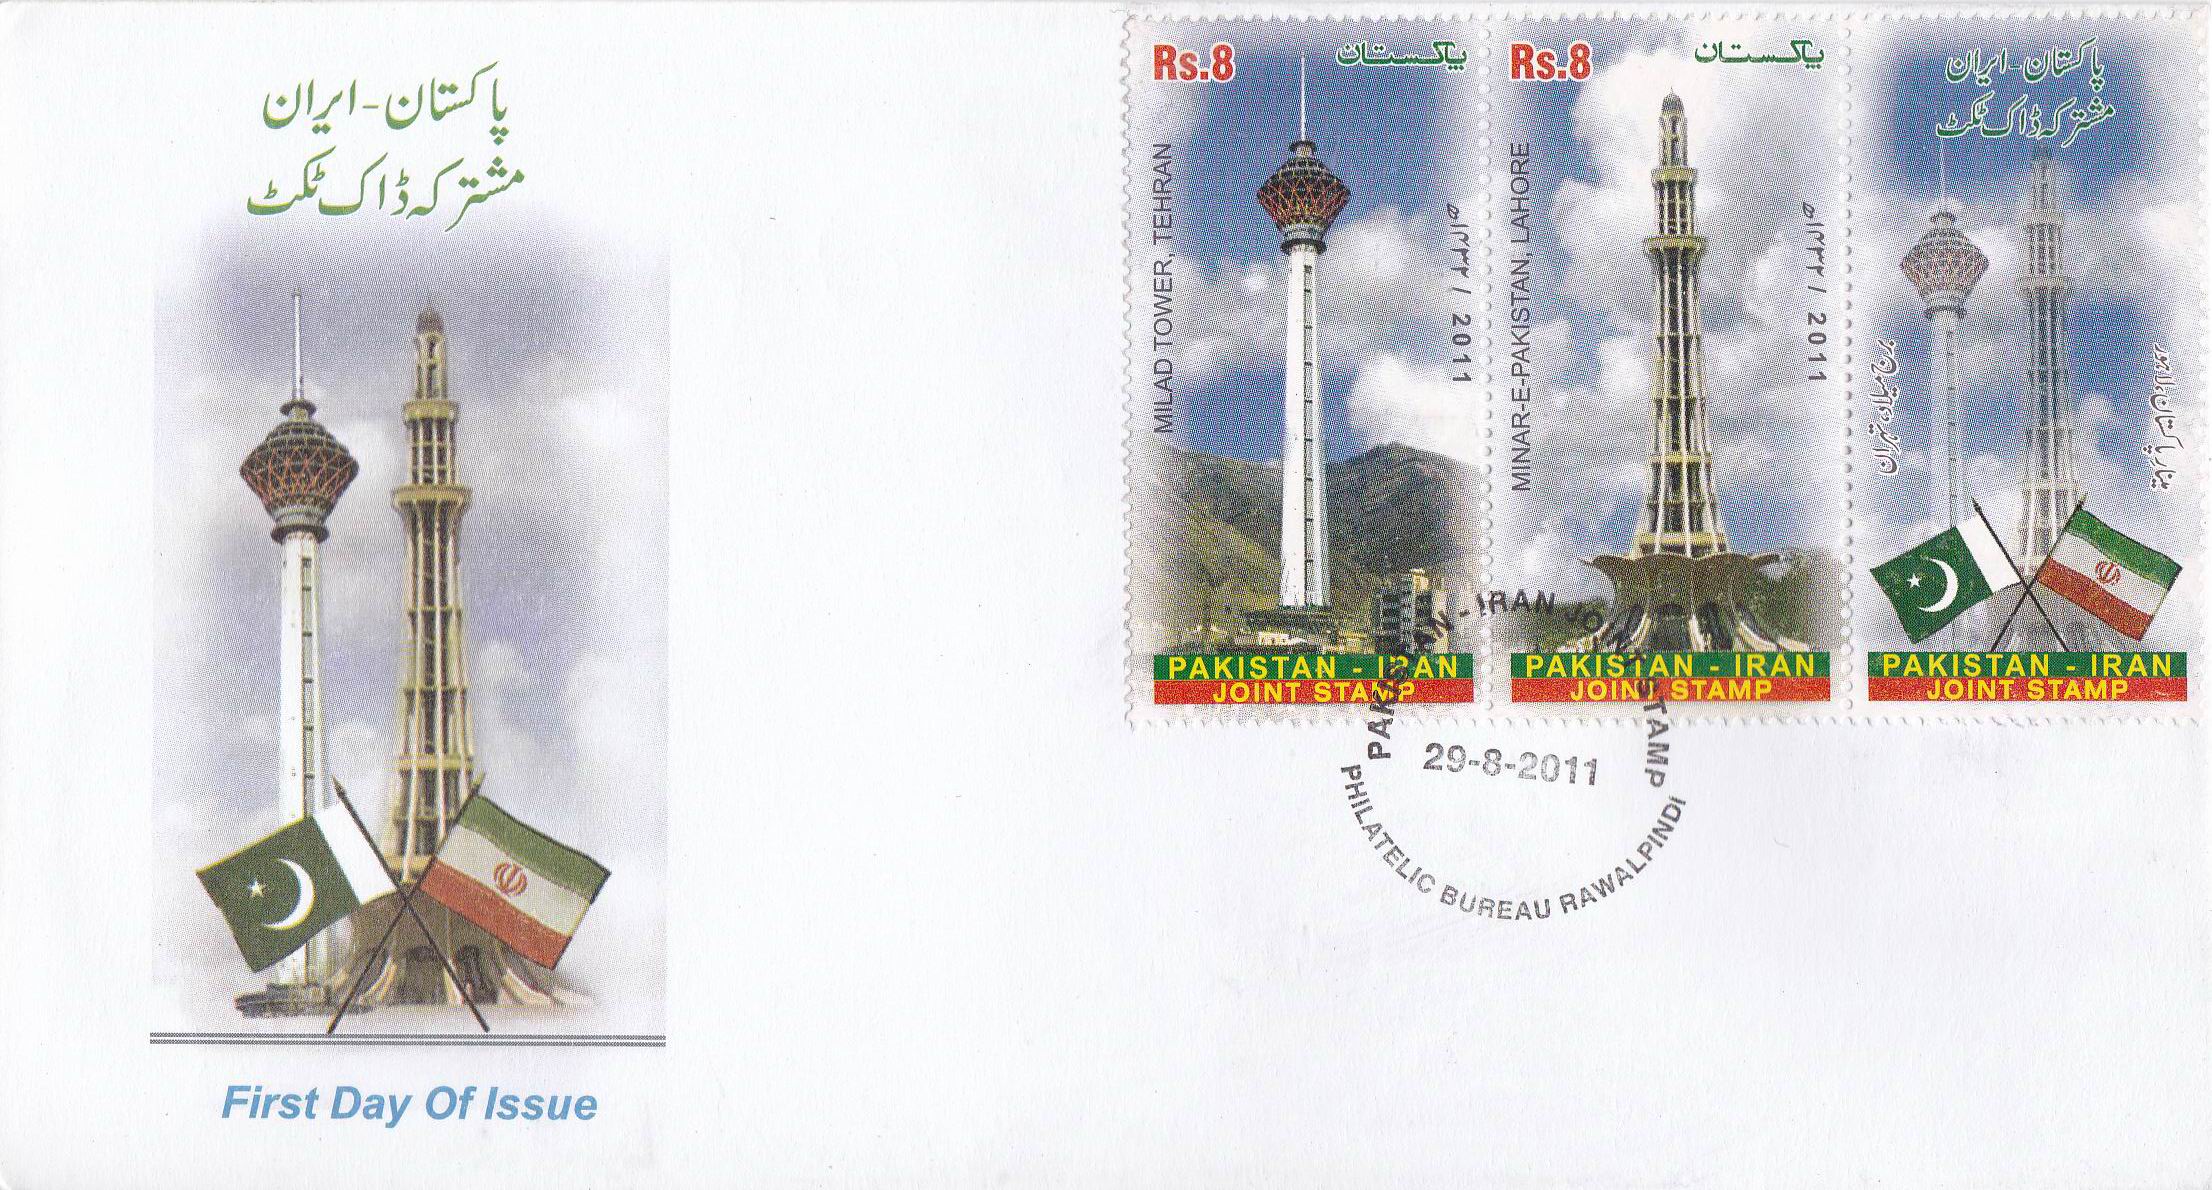 Pakistan Fdc 2011 Joint Issue Minar e Pakistan Milad Tower